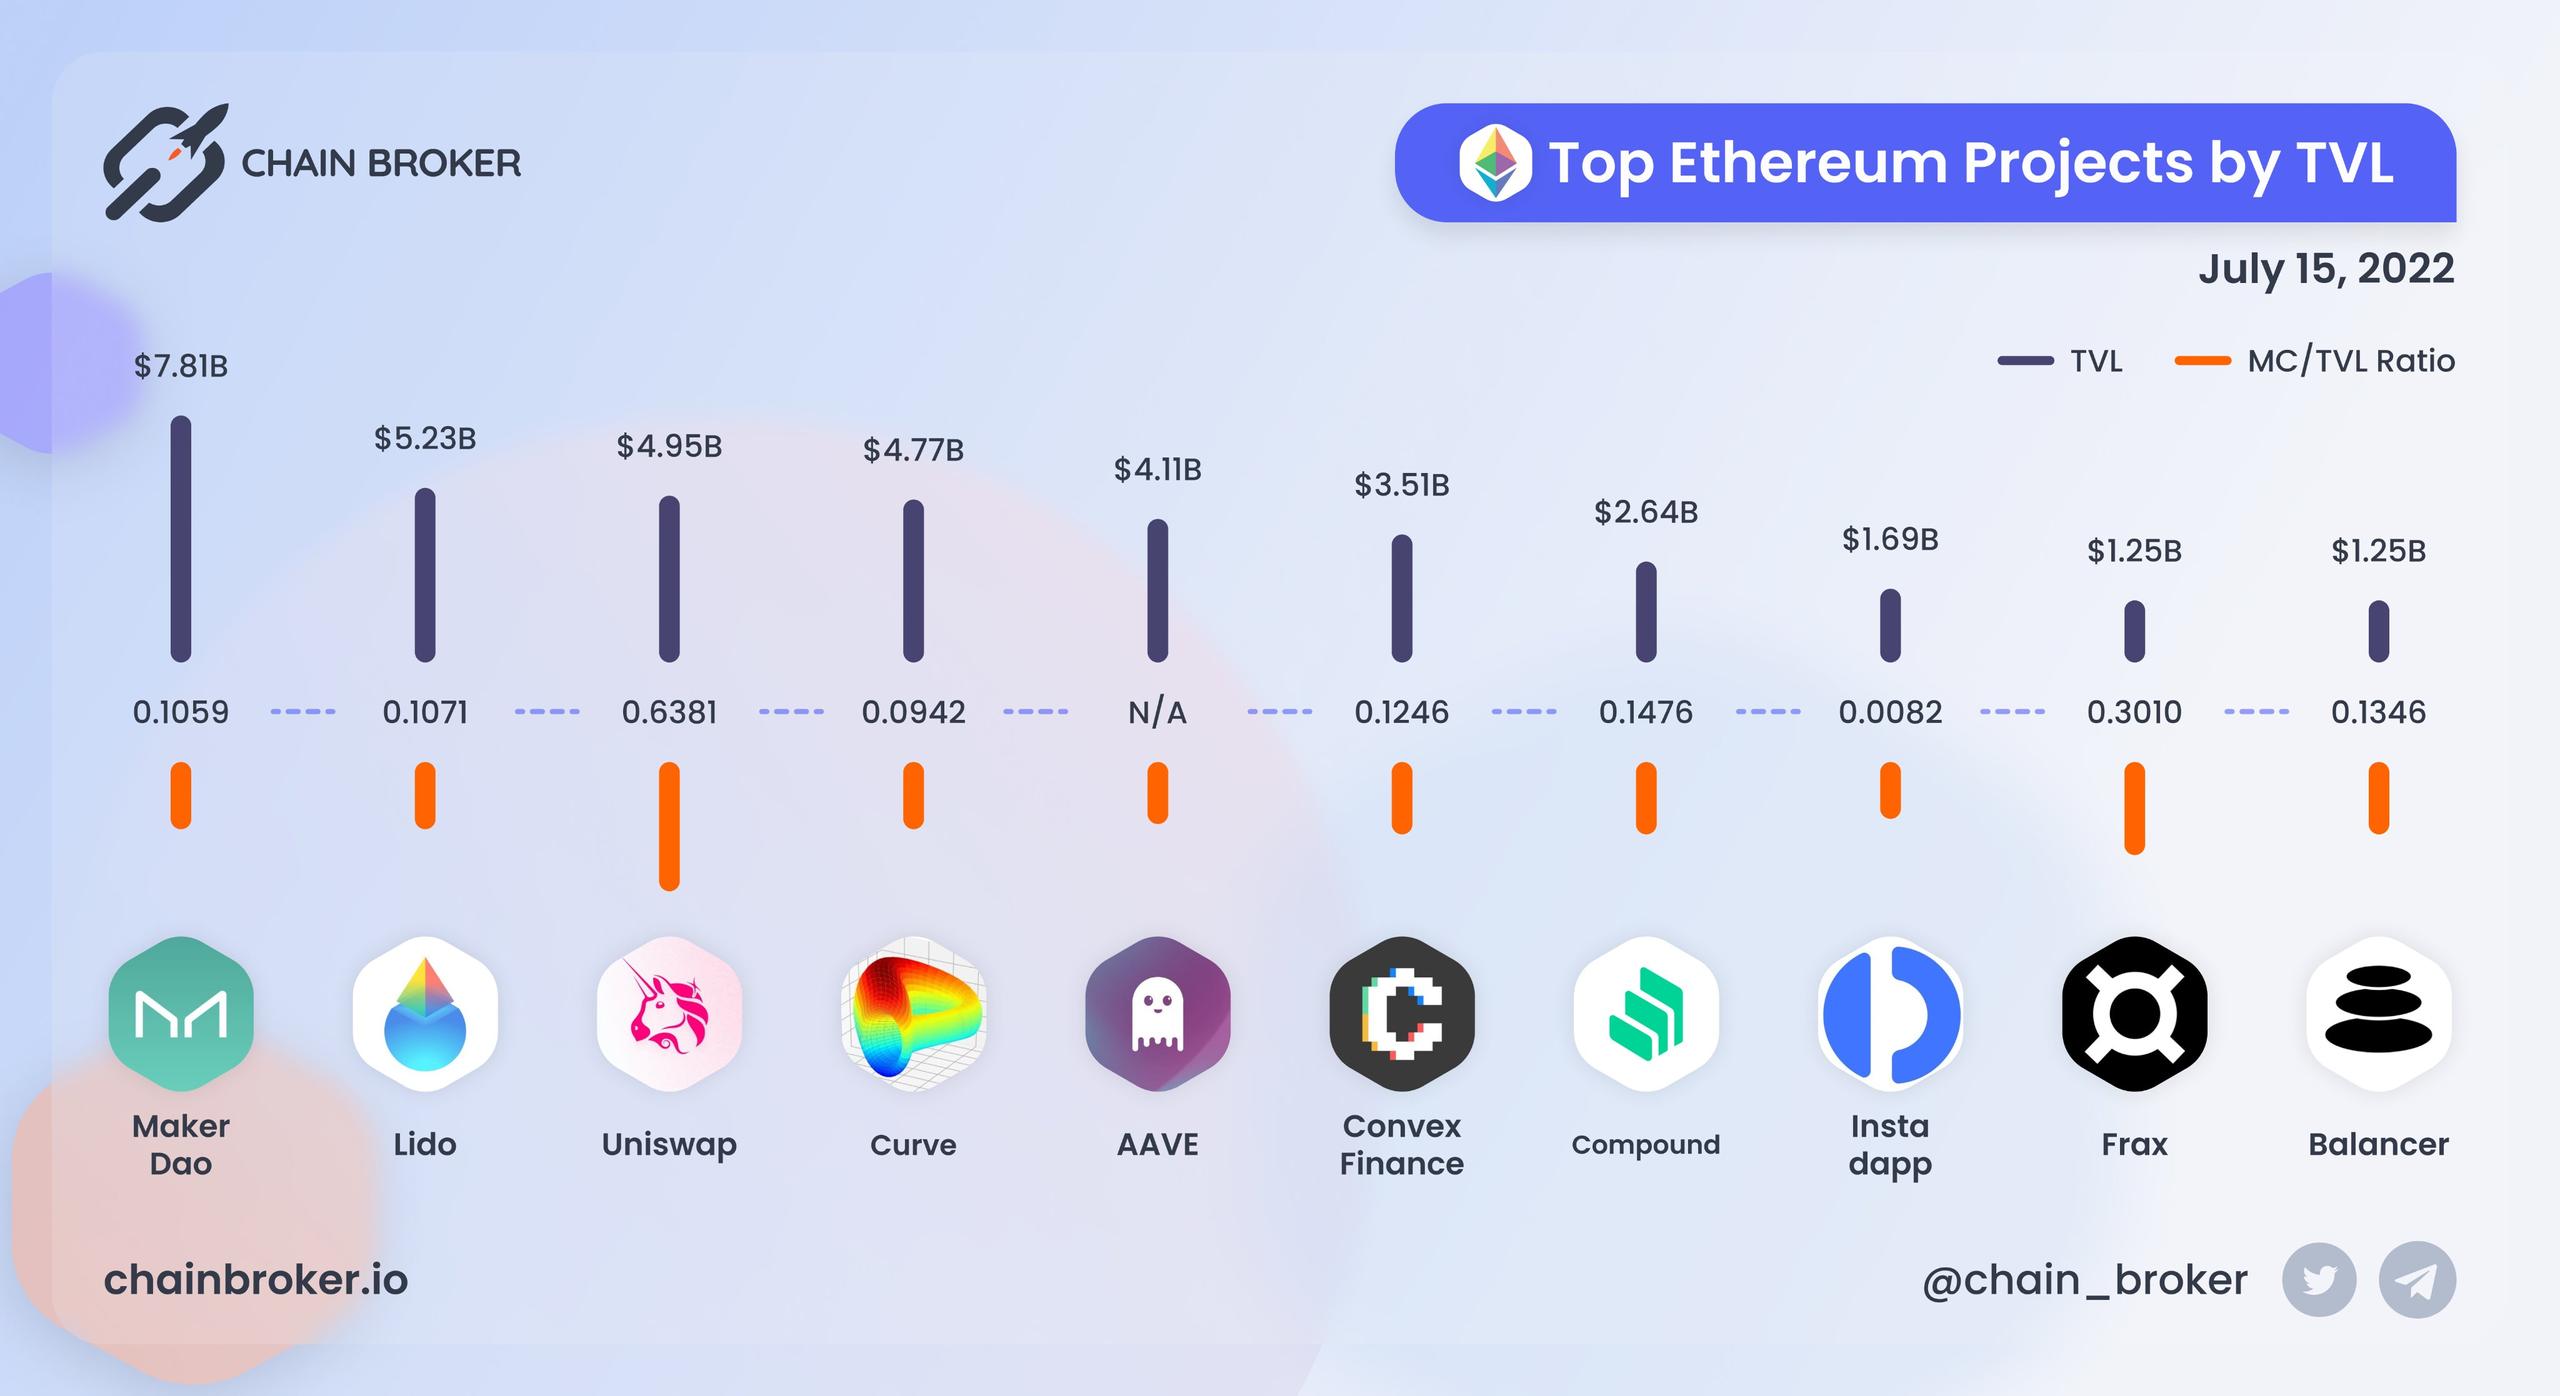 Top Ethereum projects ranged by TVL